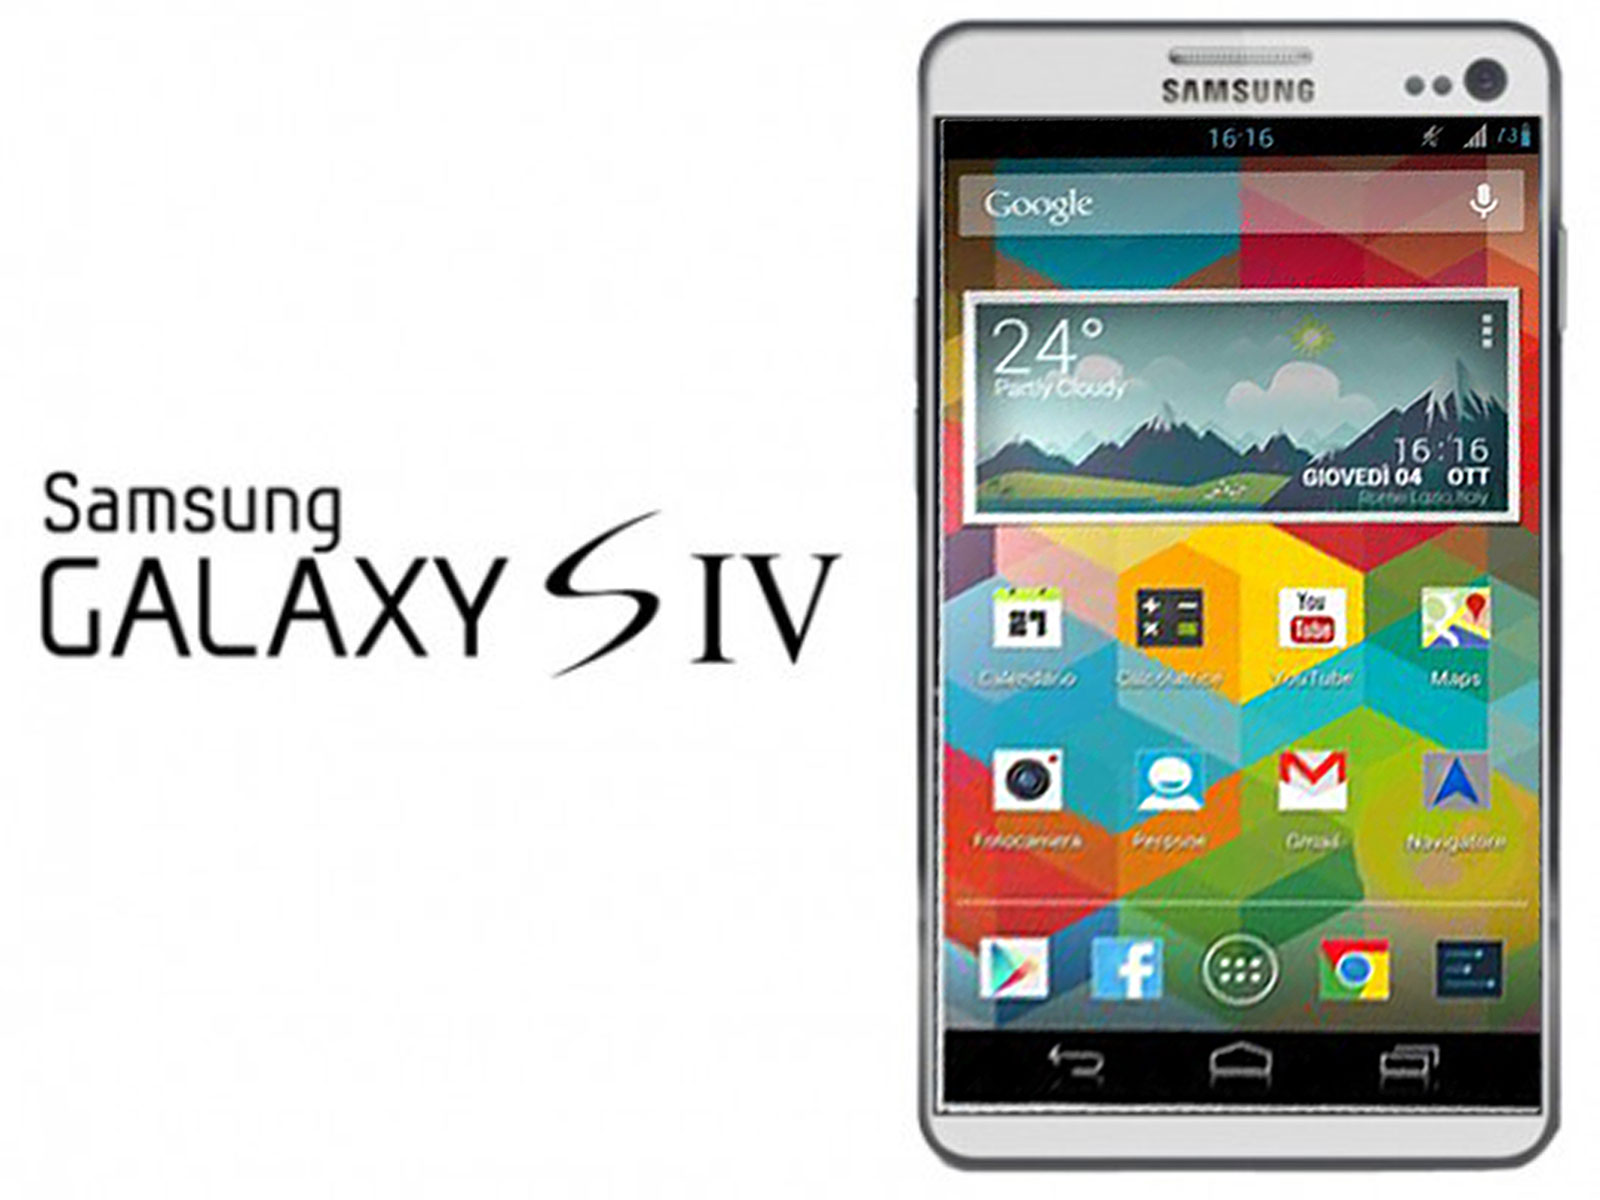 You are currently viewing Galaxy S4 without Knox security software